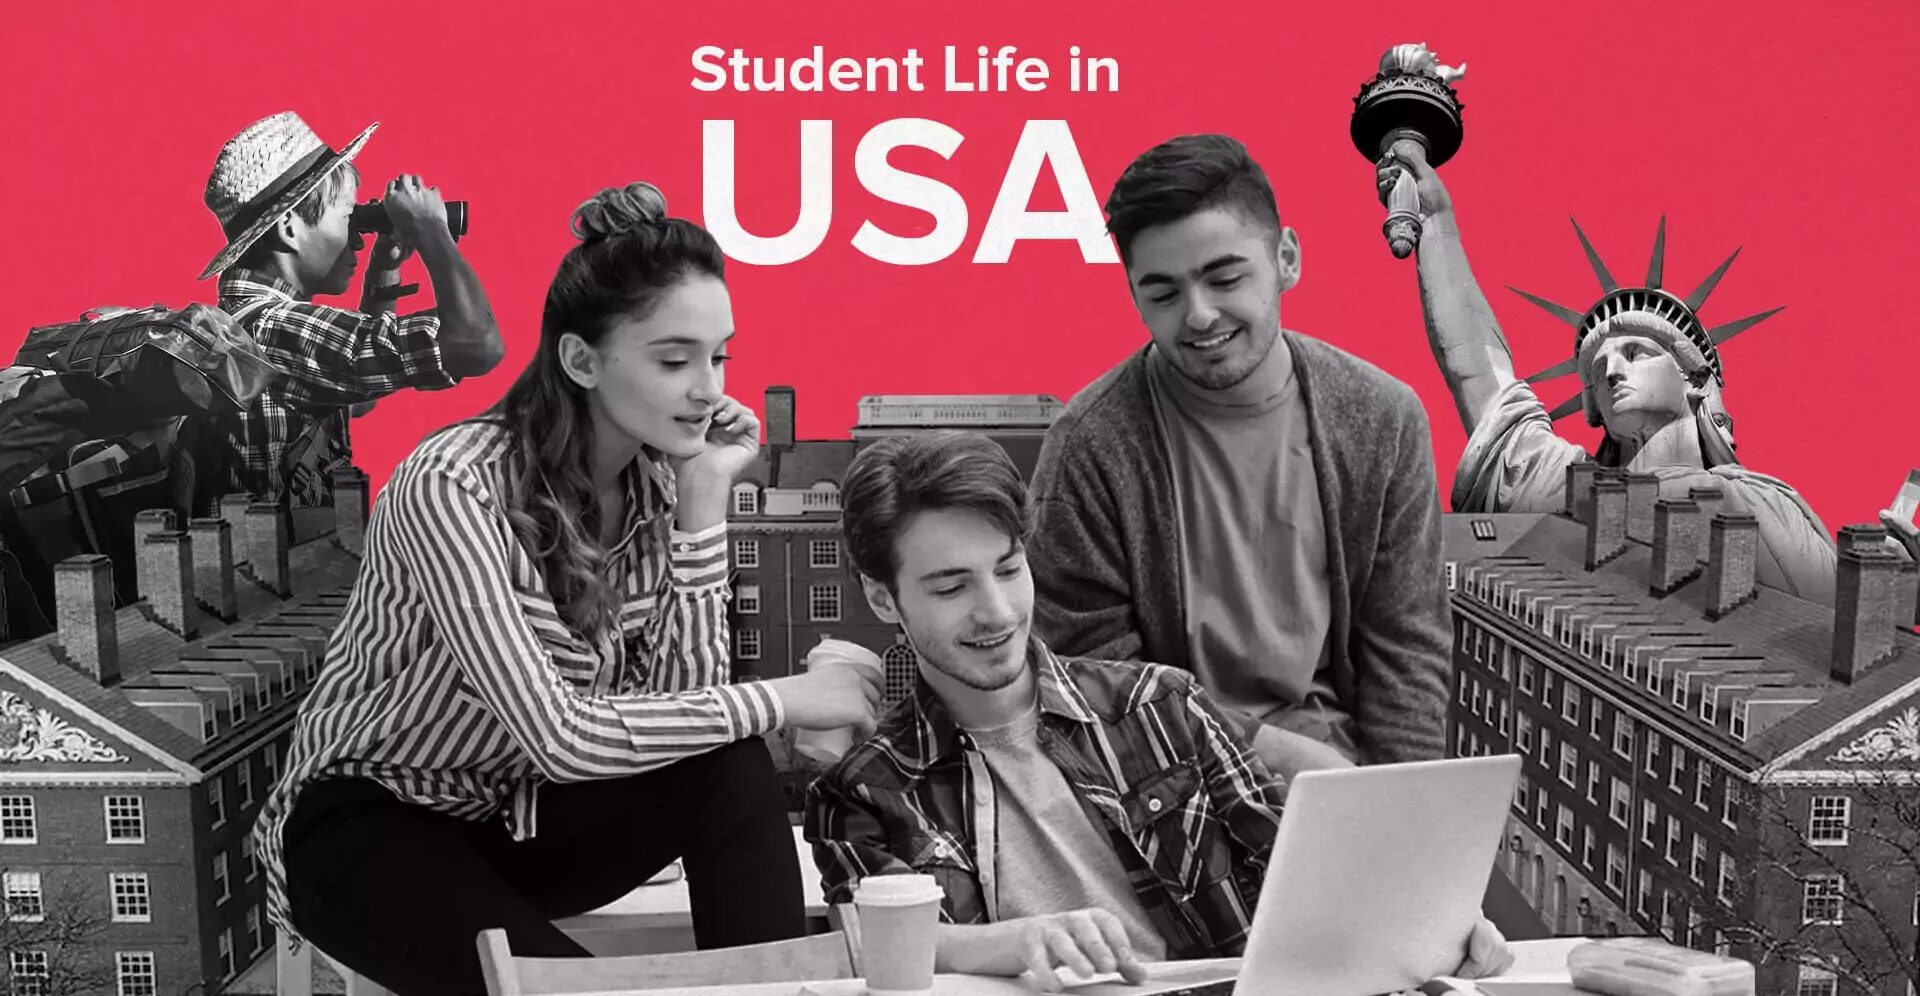 Why is Studying in USA Better Than in Other Countries?